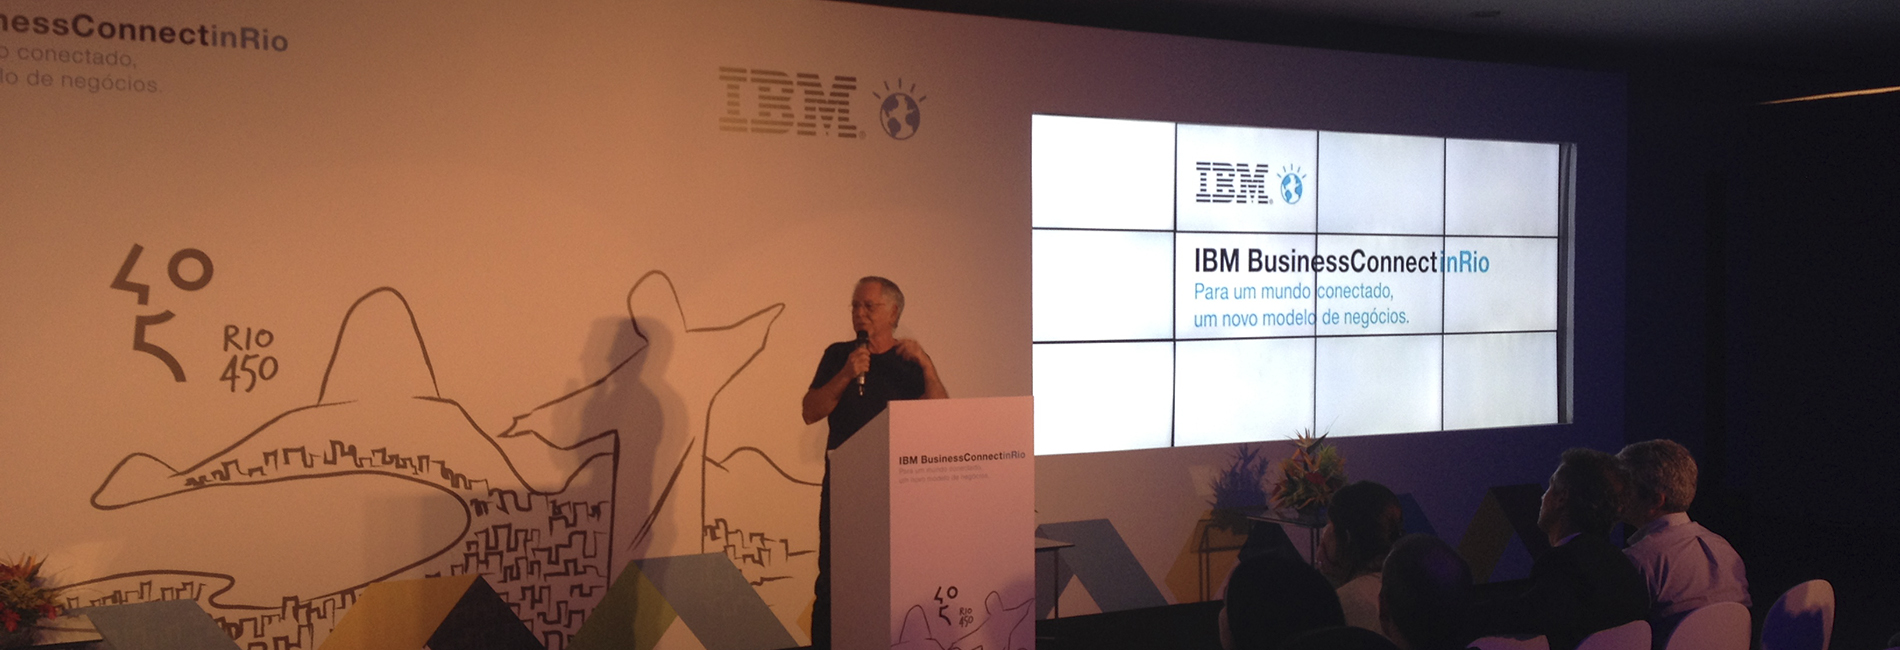 Wi-Fi IBM Business Connect In Rio